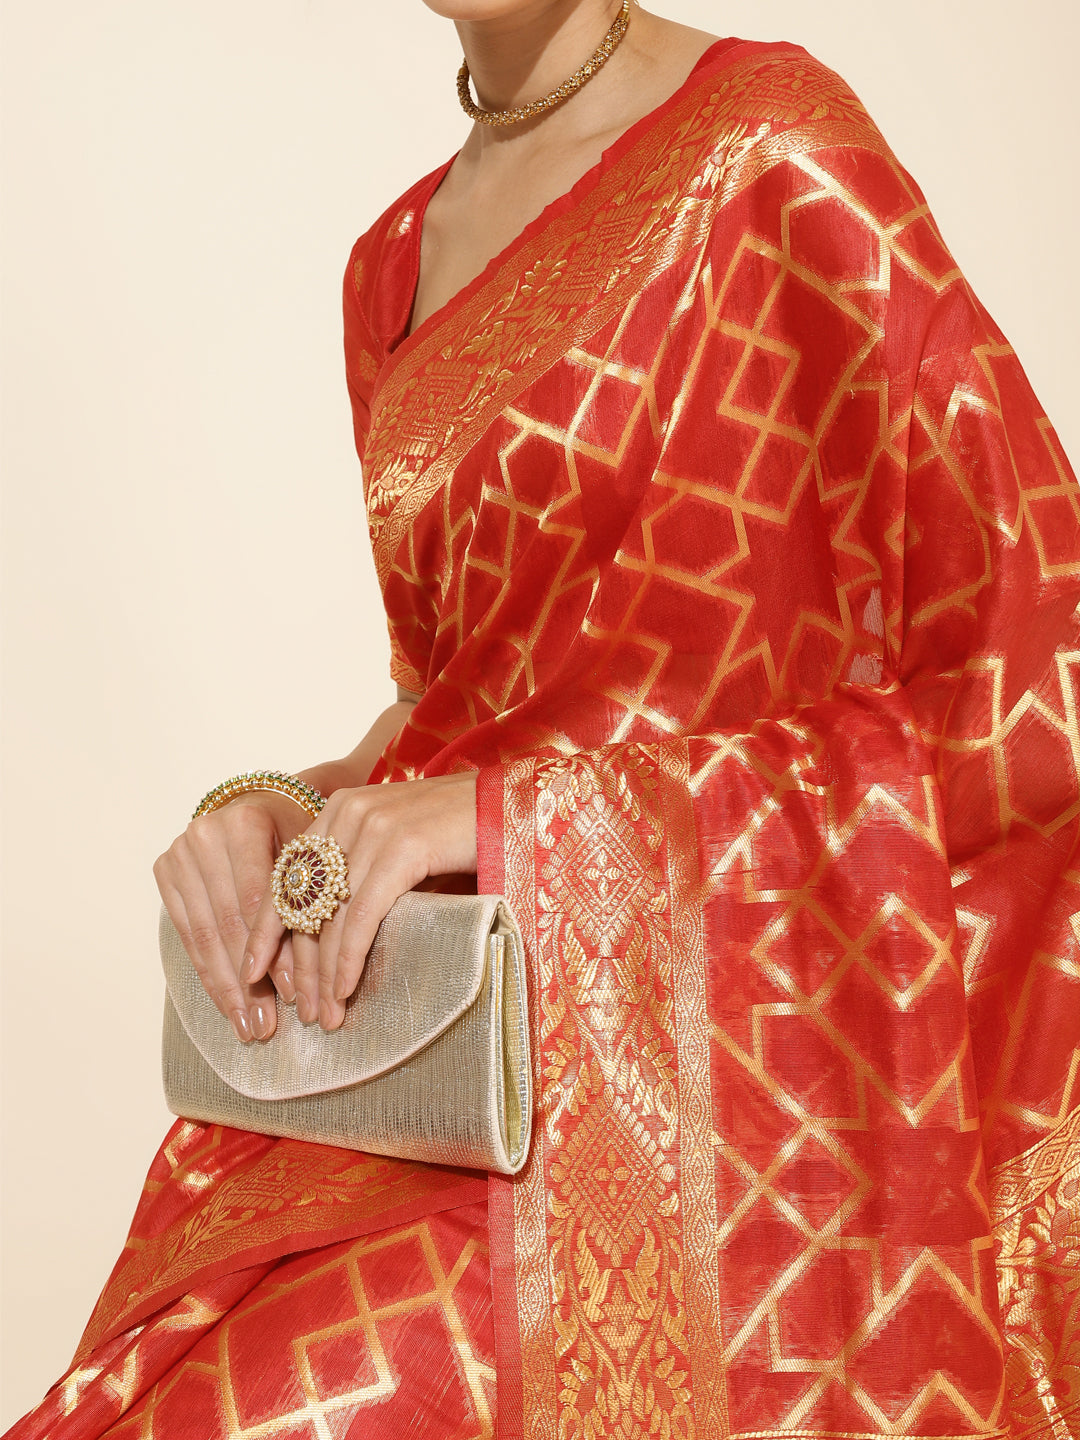 Red Chanderi Silk Woven Geometric Saree with Unstitched Blouse Piece